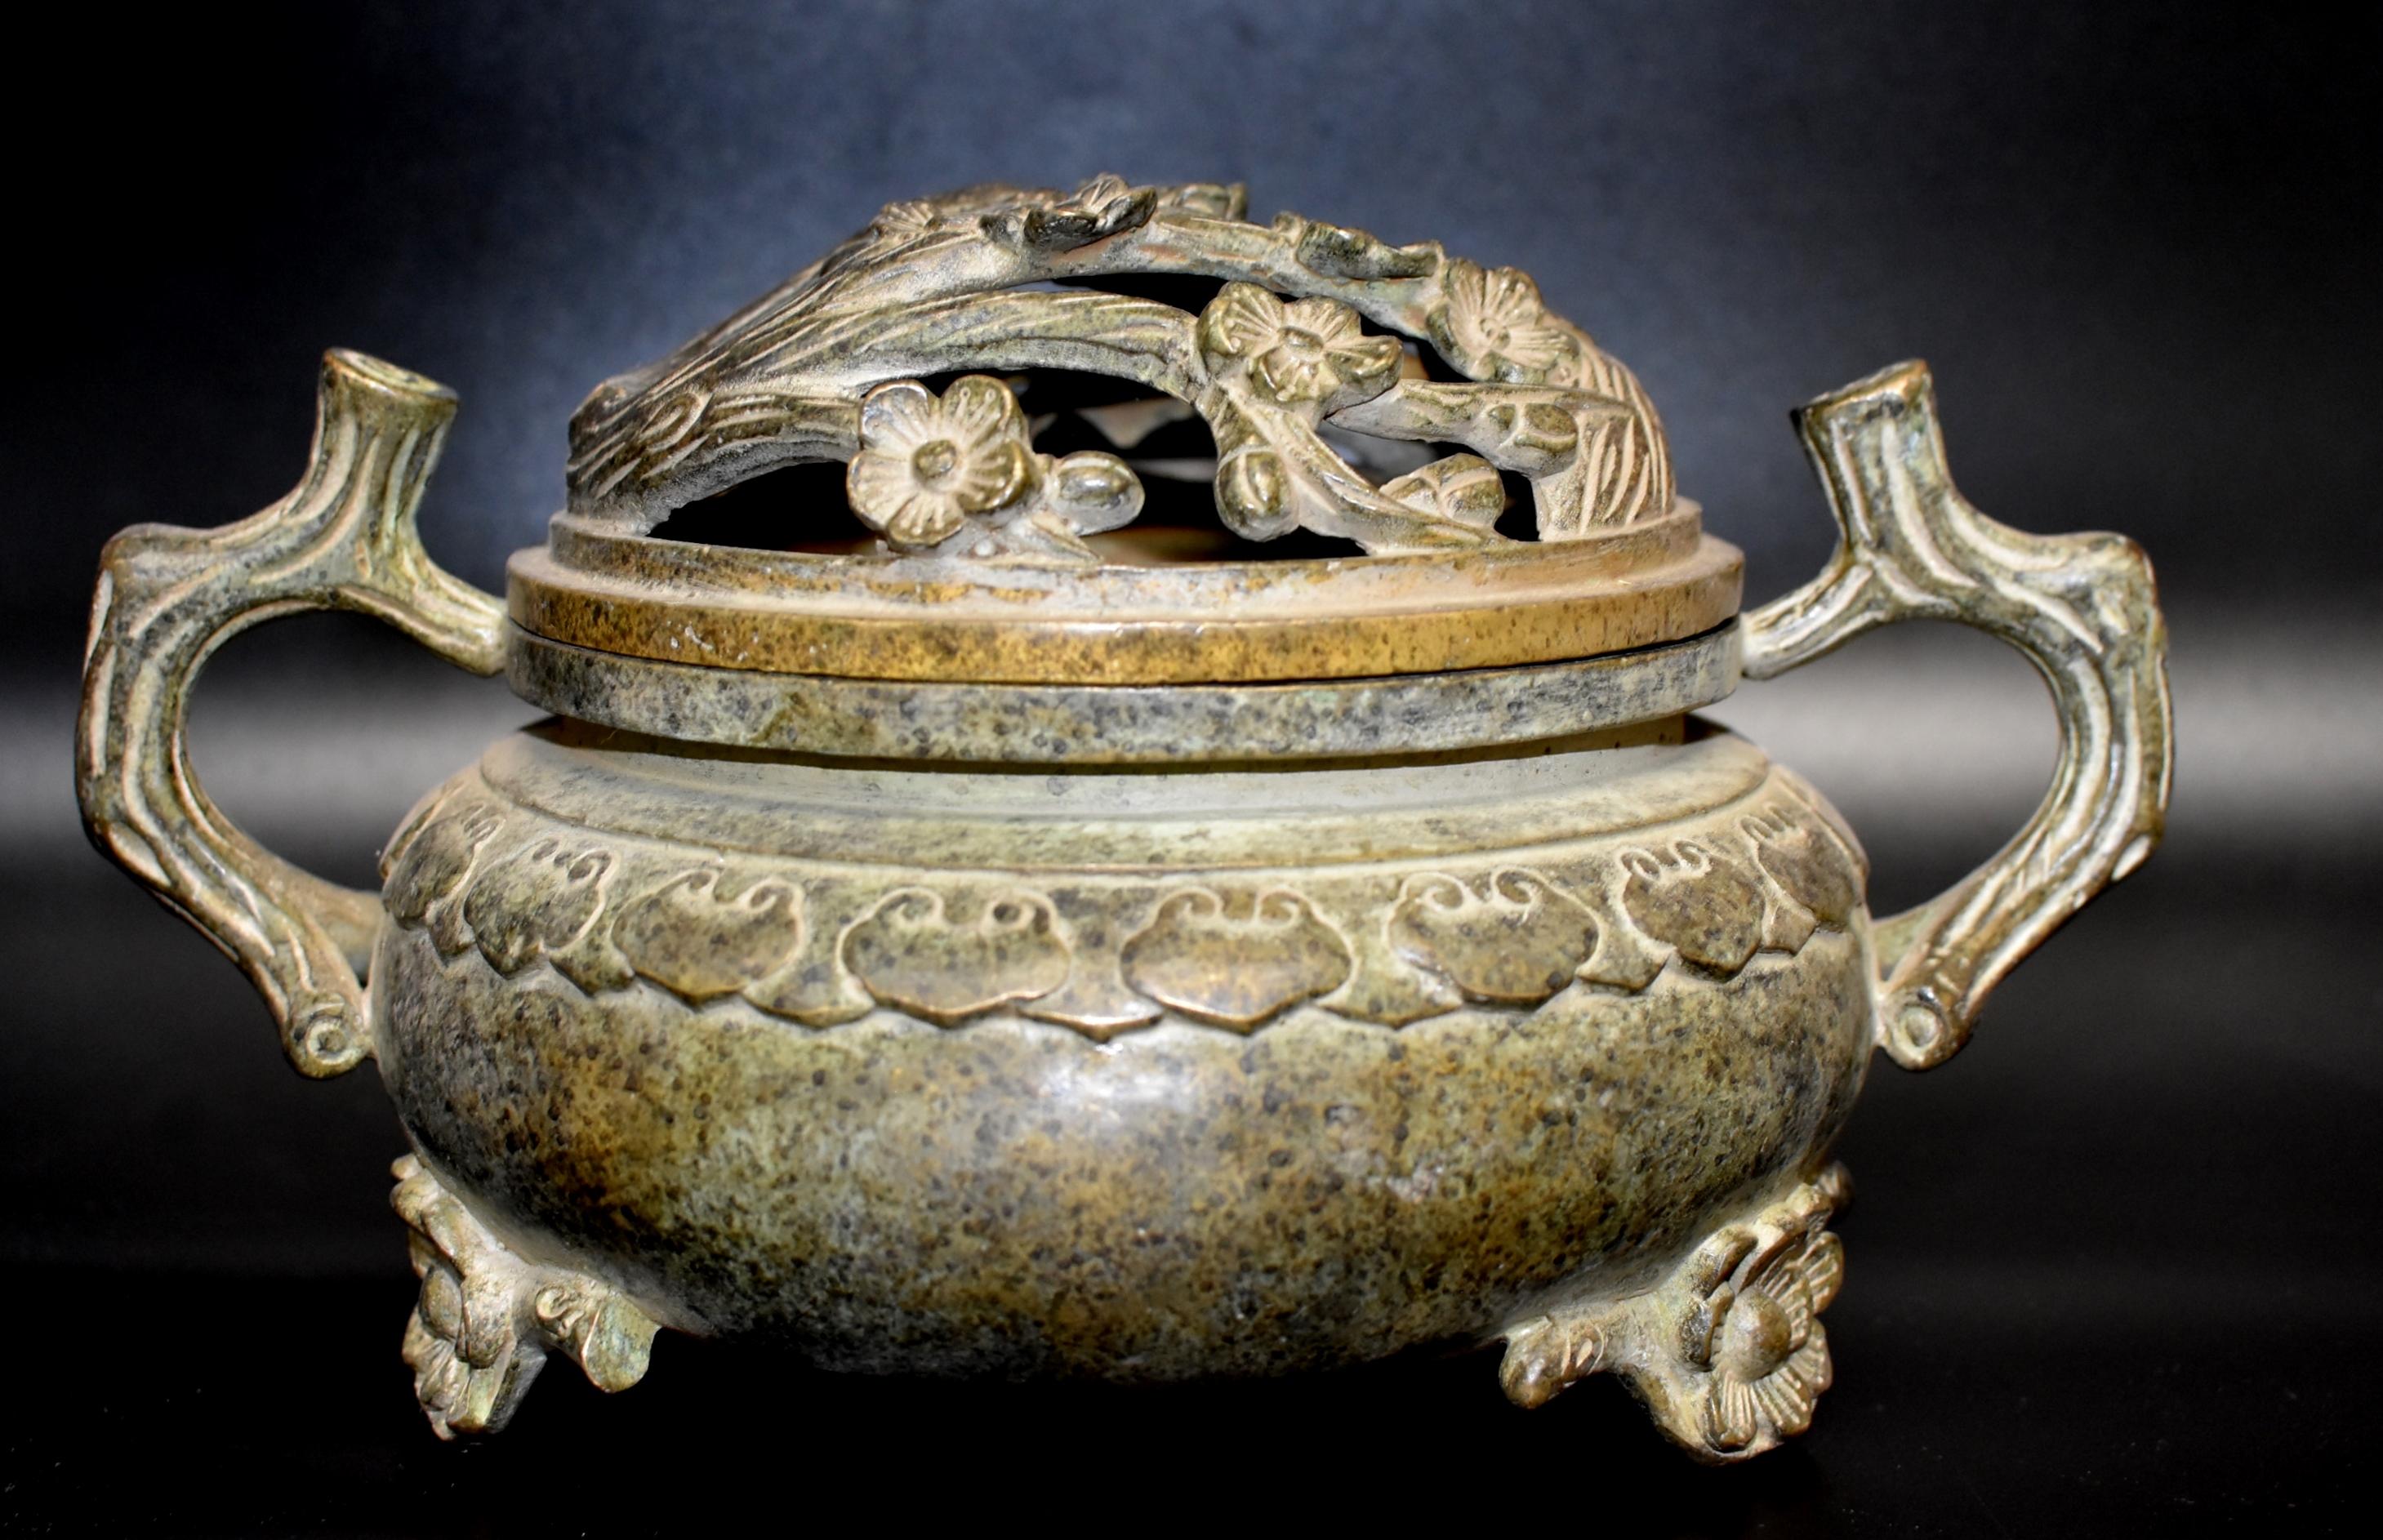 A beautiful, large Chinese incense burner. The pot is decorated with ruyi symbol with lid featuring an open work of branches of plum blossoms. The blossom motif is repeated on the feet. The handles of the burner are branch patterns which echo the